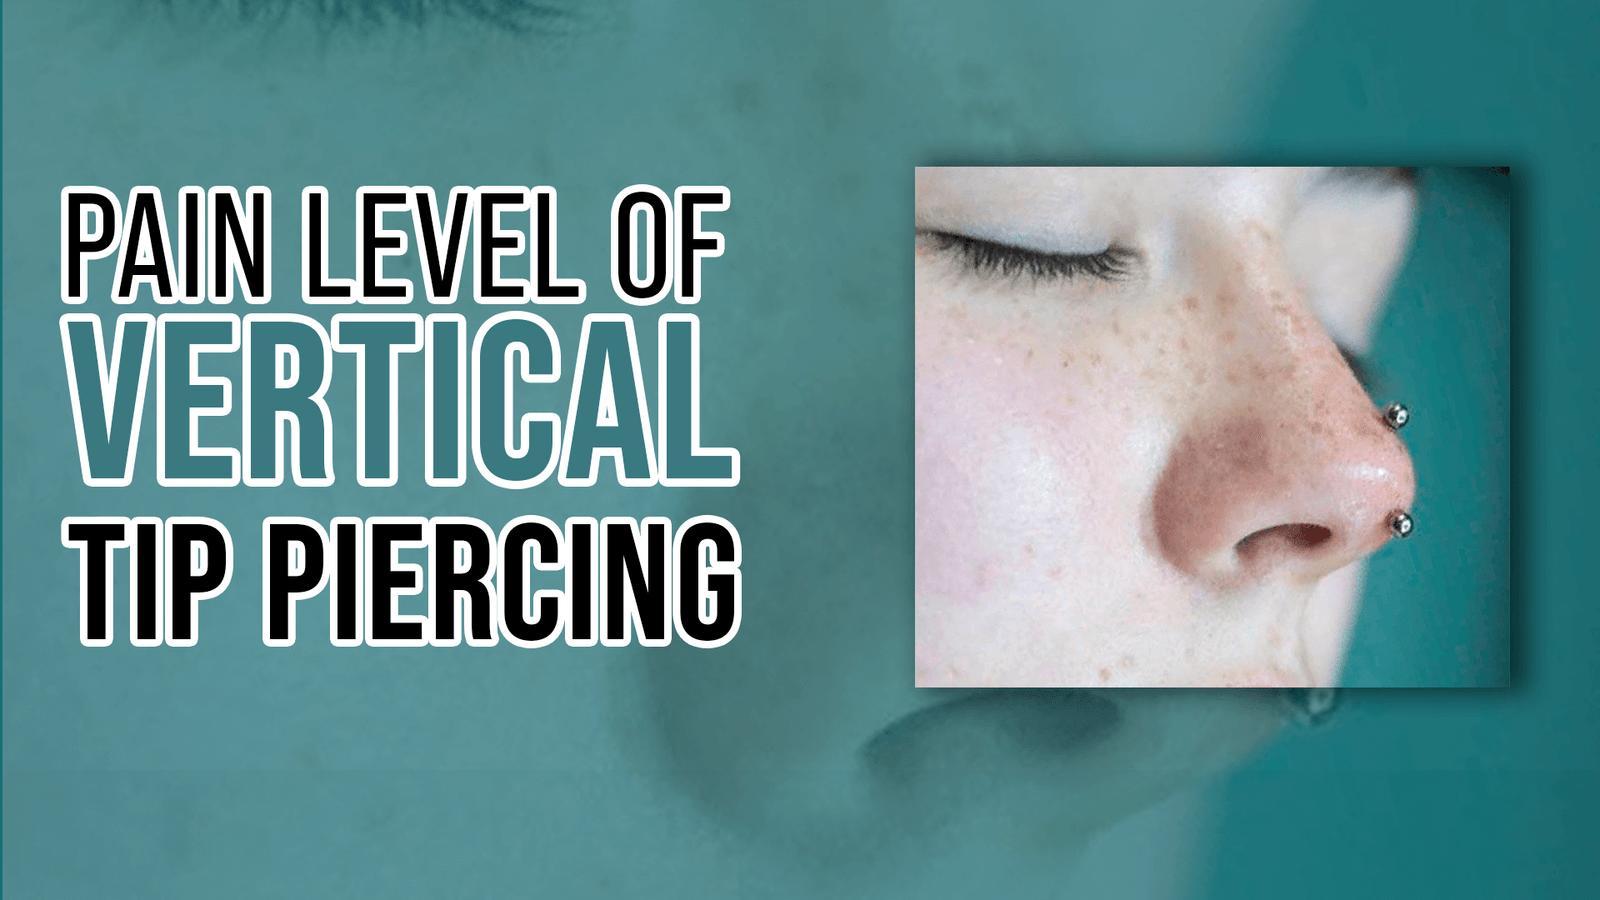 Pain-Level-of-Vertical-Tip-Piercing